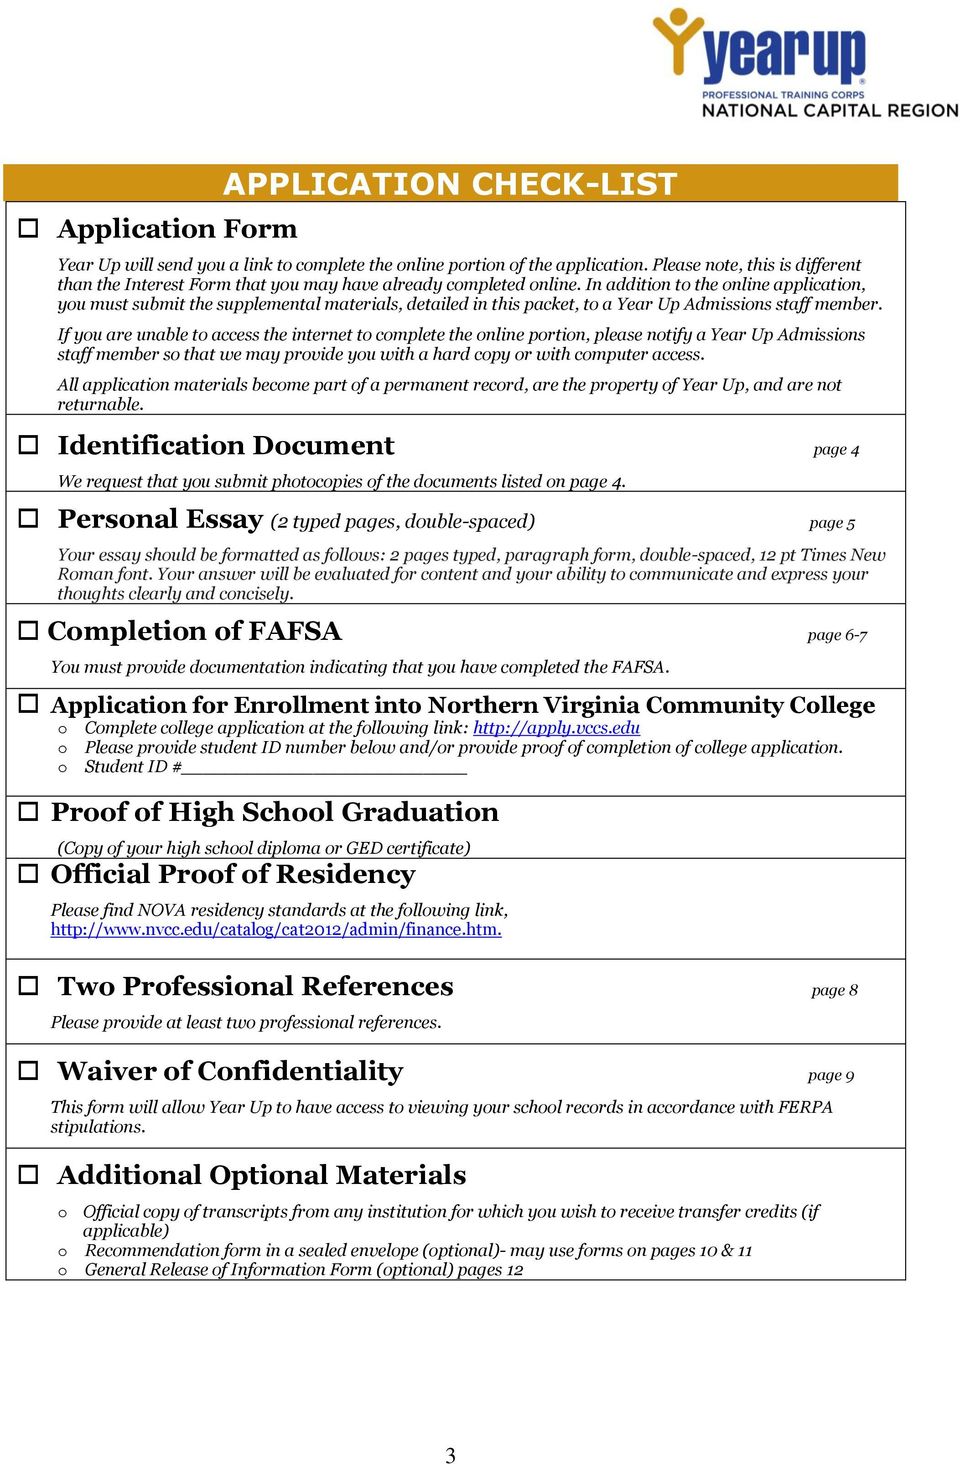 In addition to the online application, you must submit the supplemental materials, detailed in this packet, to a Year Up Admissions staff member.